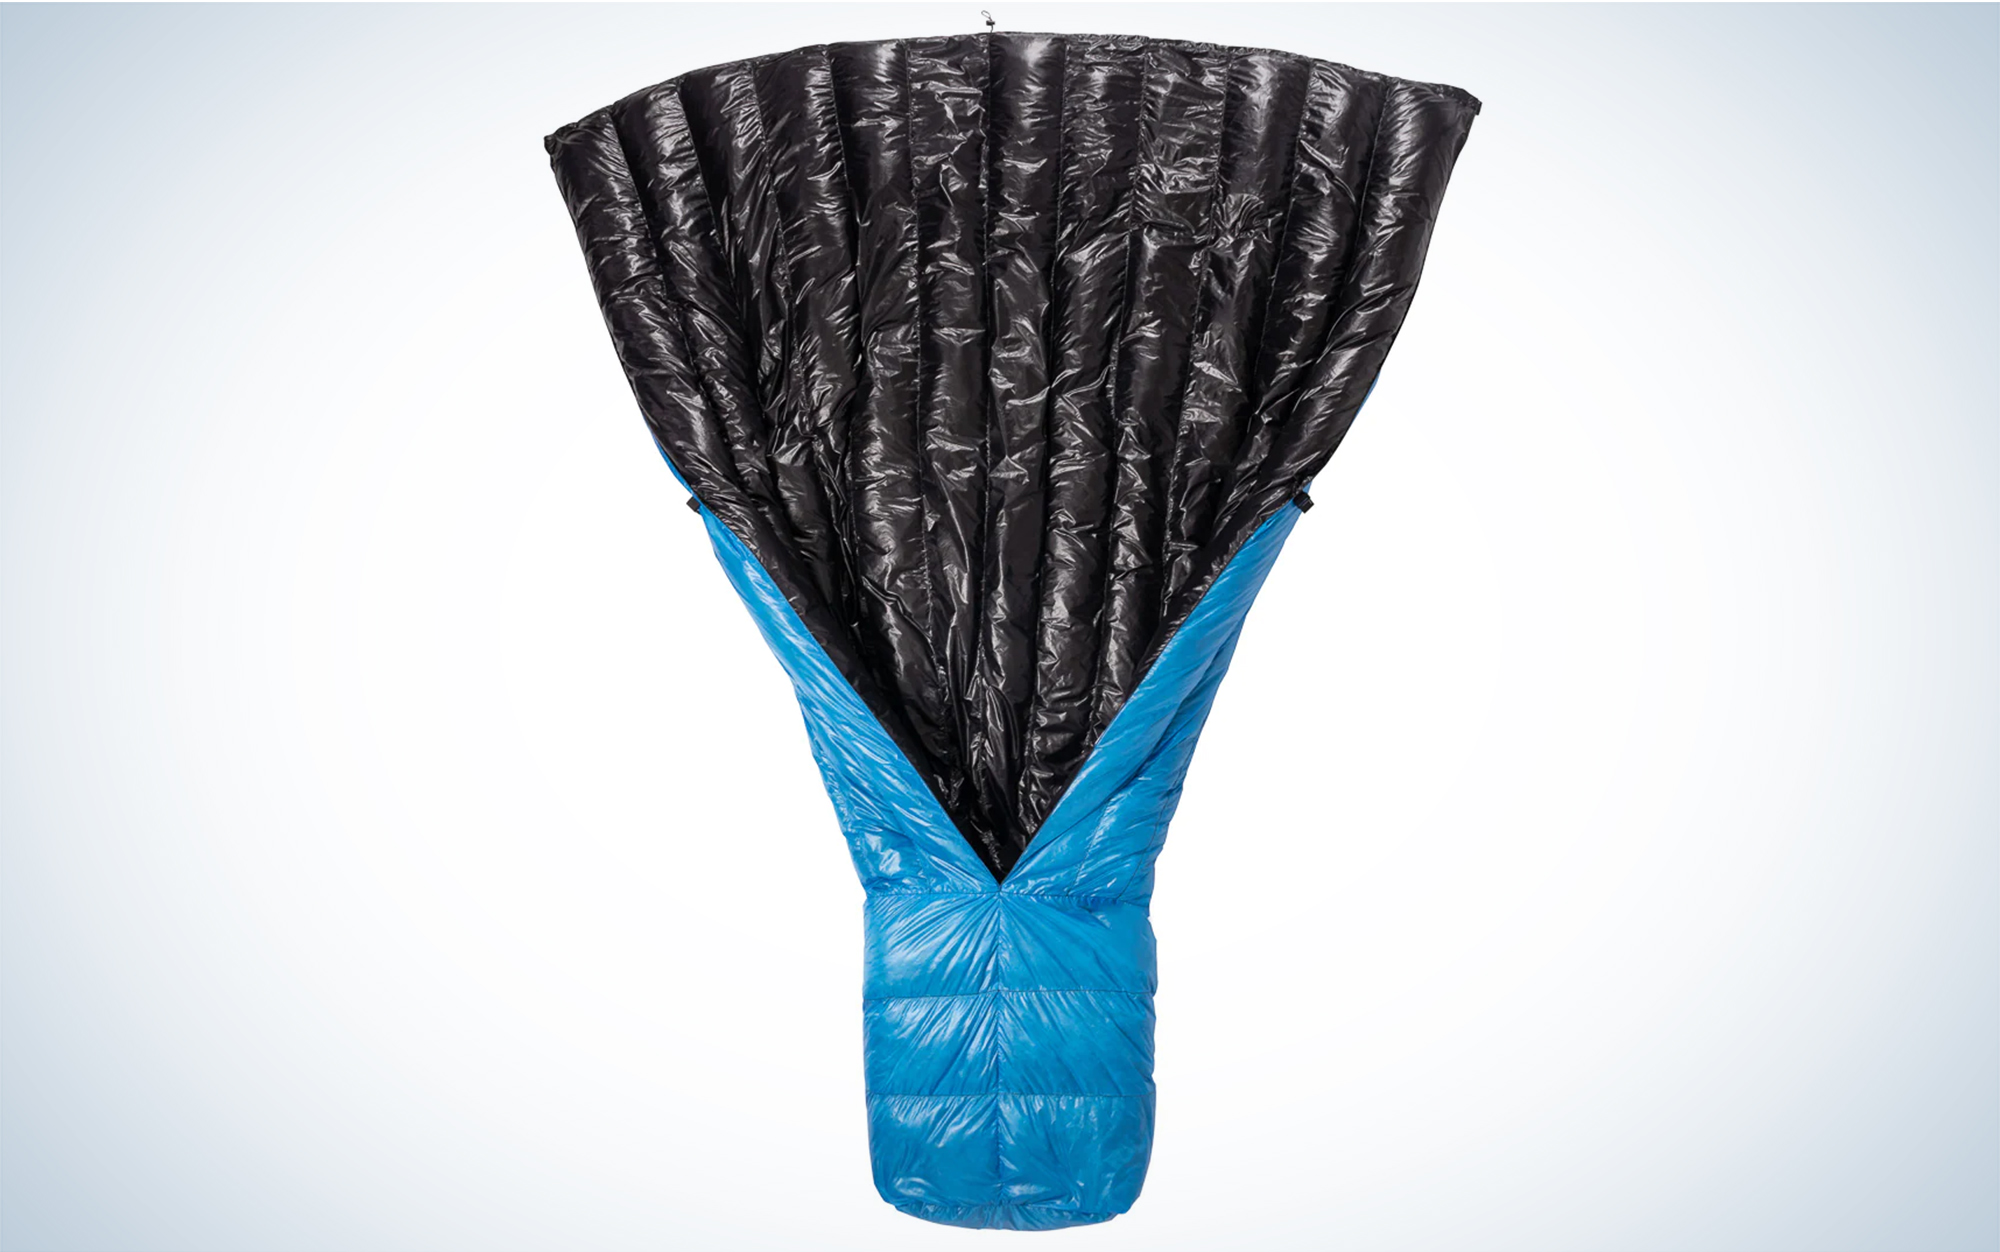 The Zpacks Solo Quilt is the lightest.